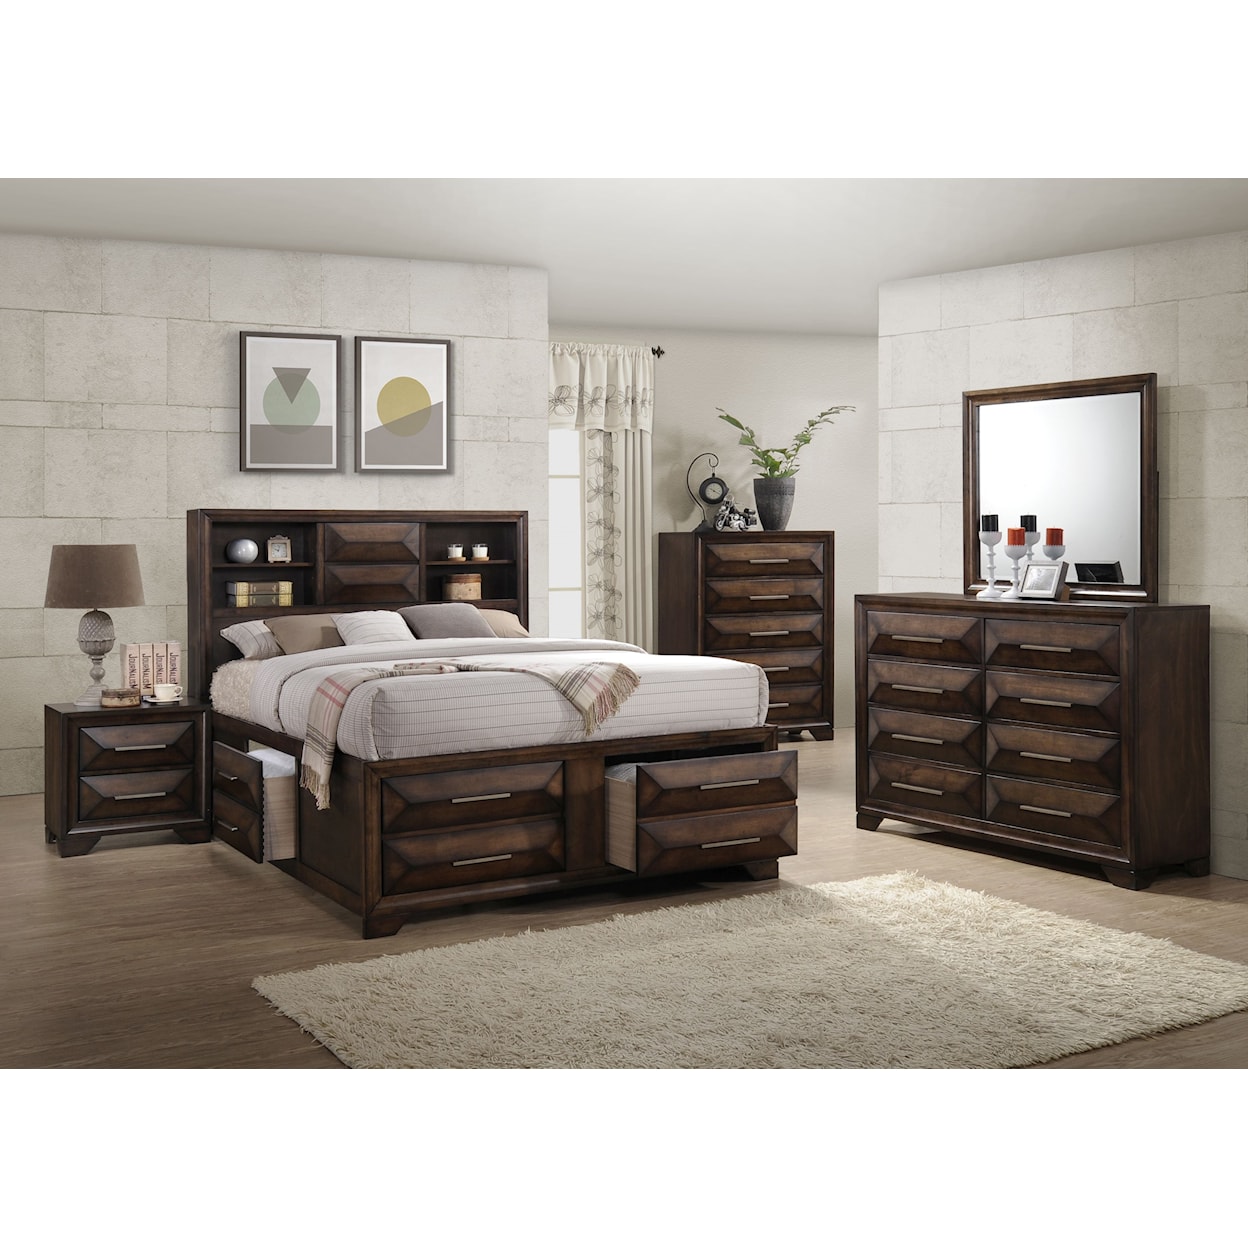 Lifestyle 1035A Queen 5-Pc Bedroom Group